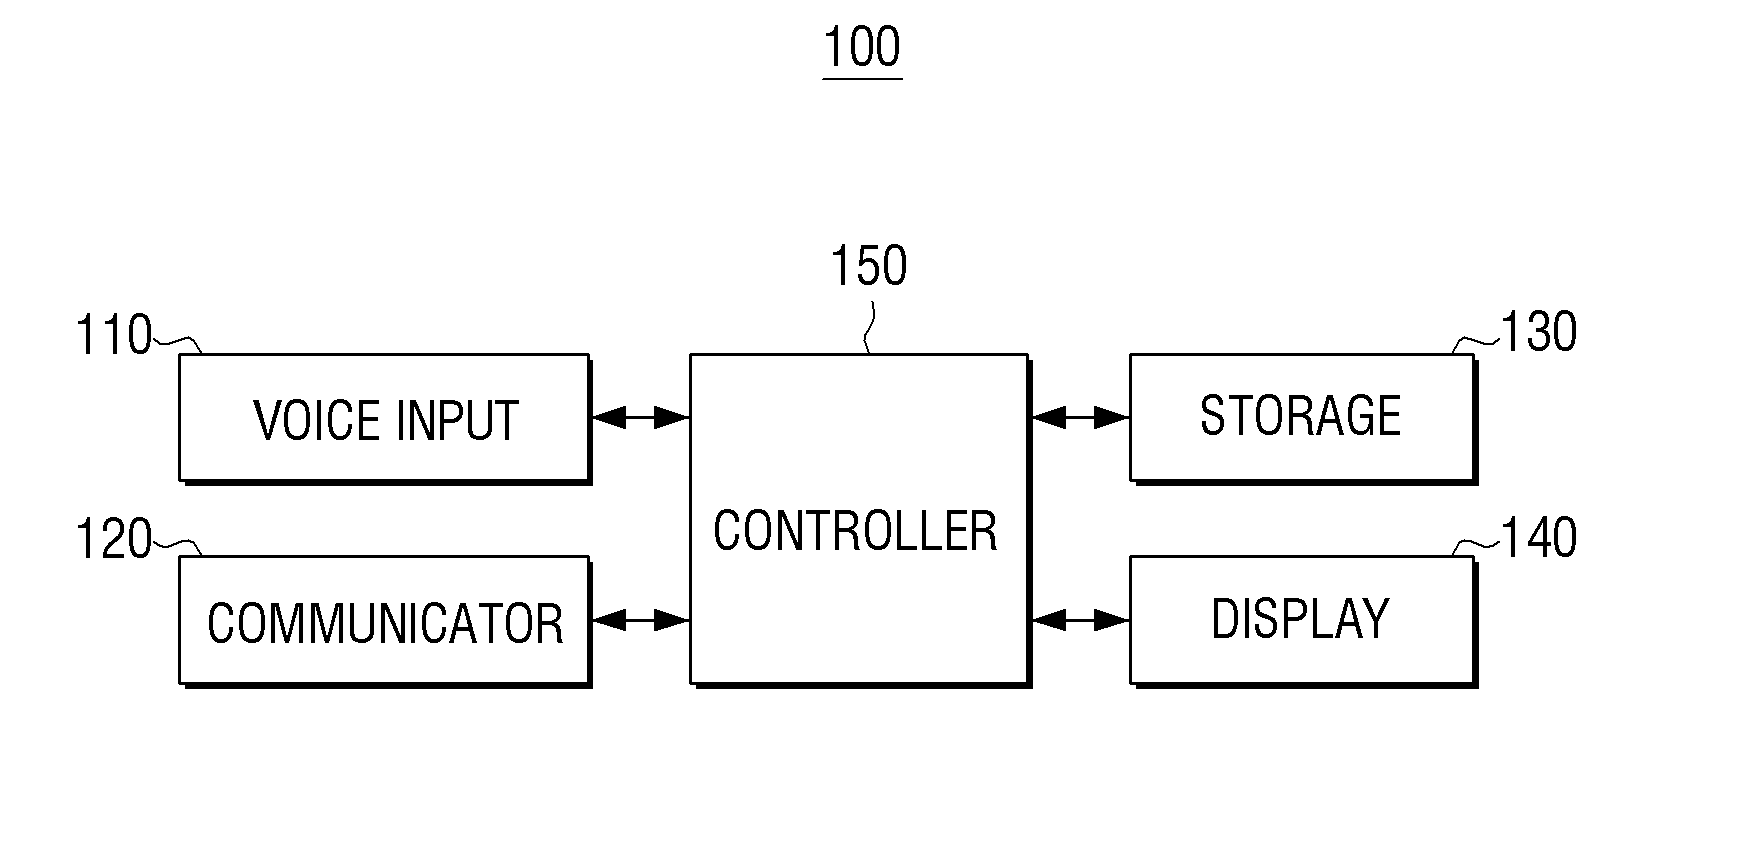 Display apparatus and method of controlling a display
apparatus in a voice recognition system